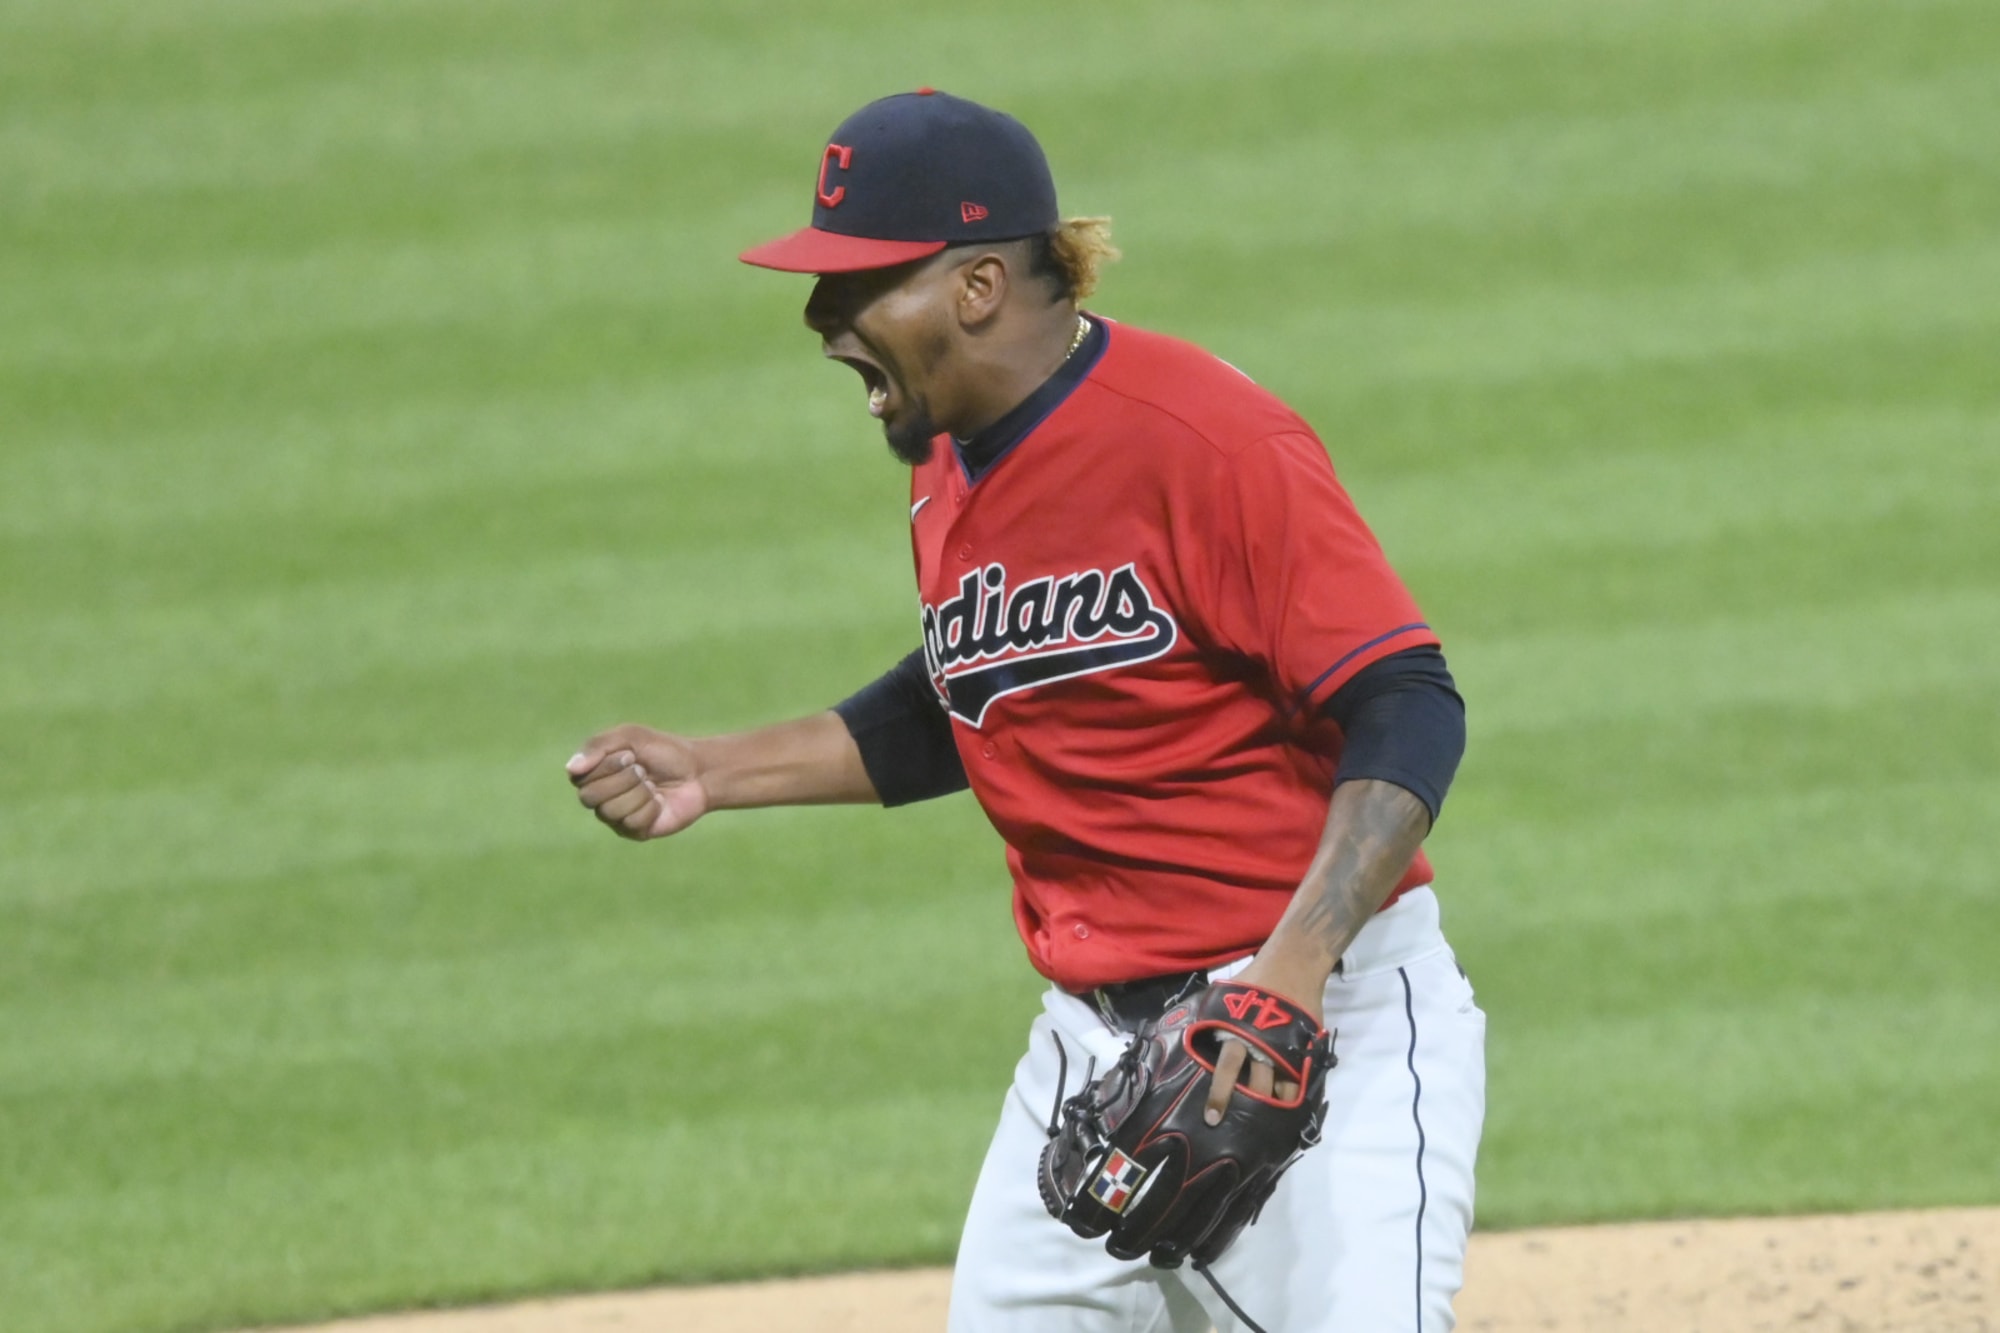 Indians Cleveland Gets Shutout For All 3 Major Post Season Awards